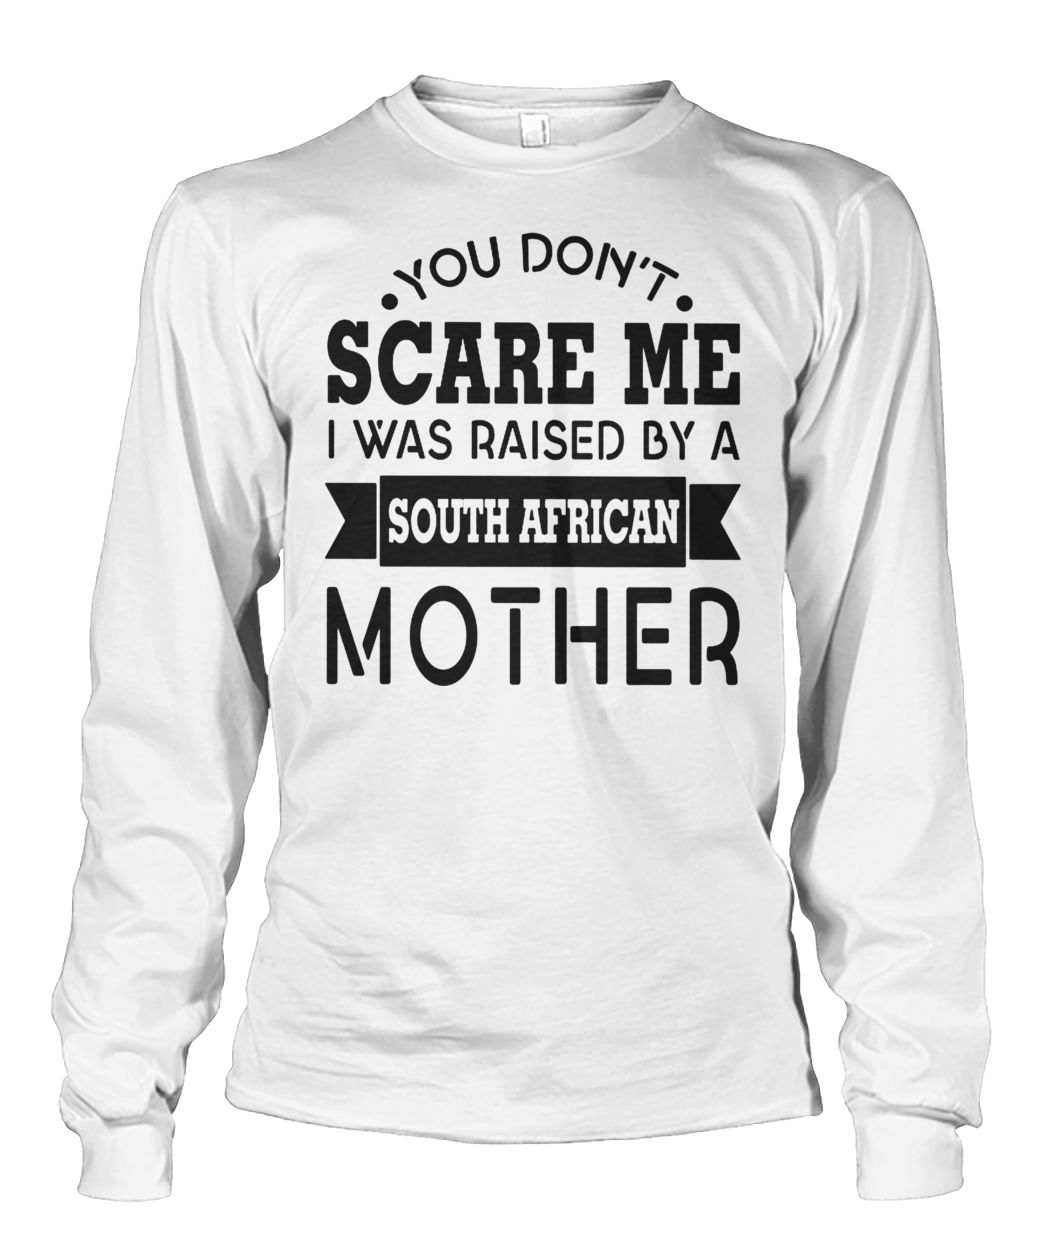 You don't scare me I was raised by a south african mother unisex long sleeve